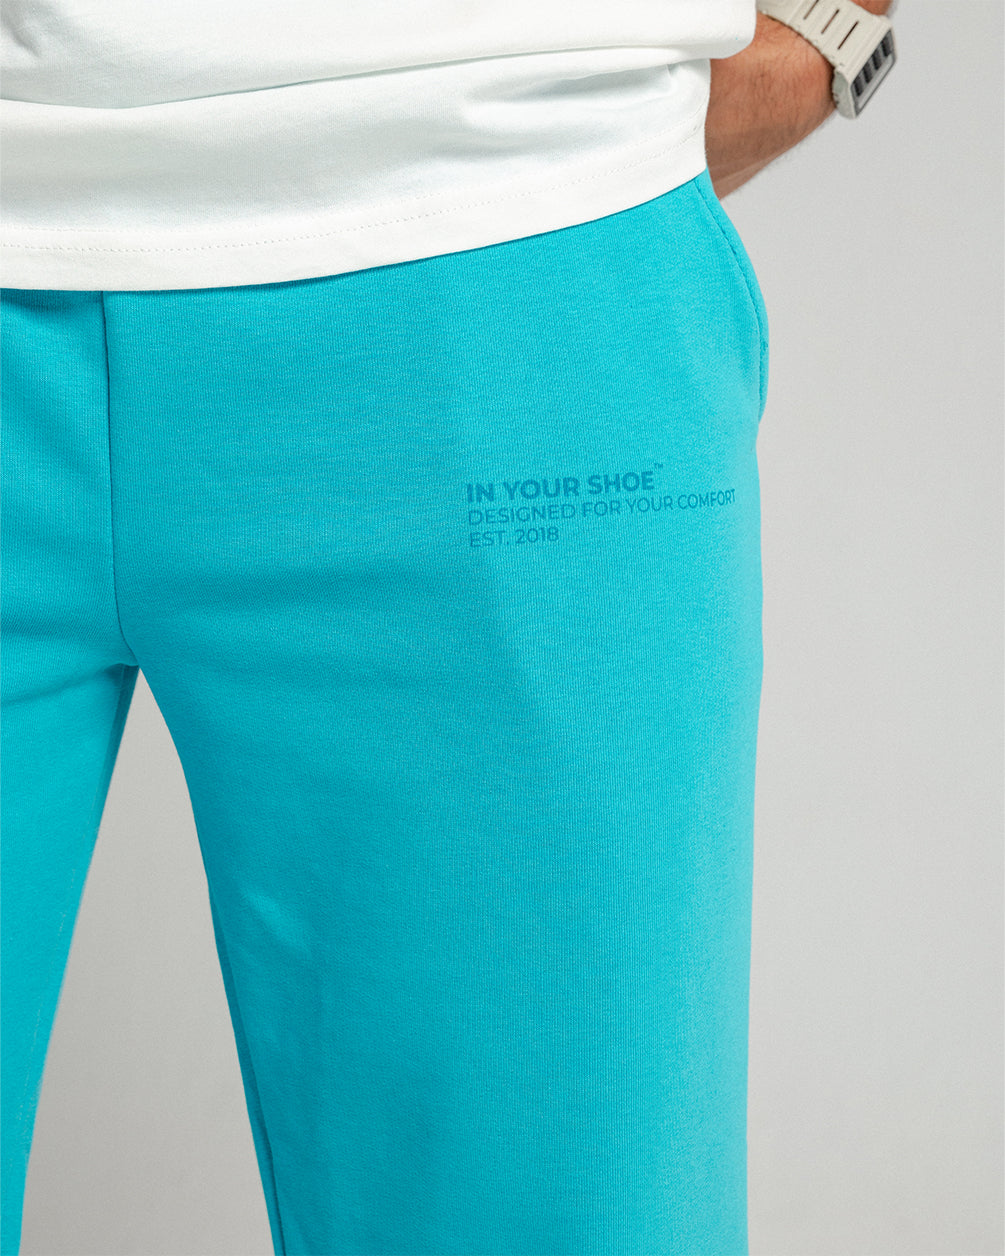 Turquoise Swants (Sweatpants) Swants IN YOUR SHOE 